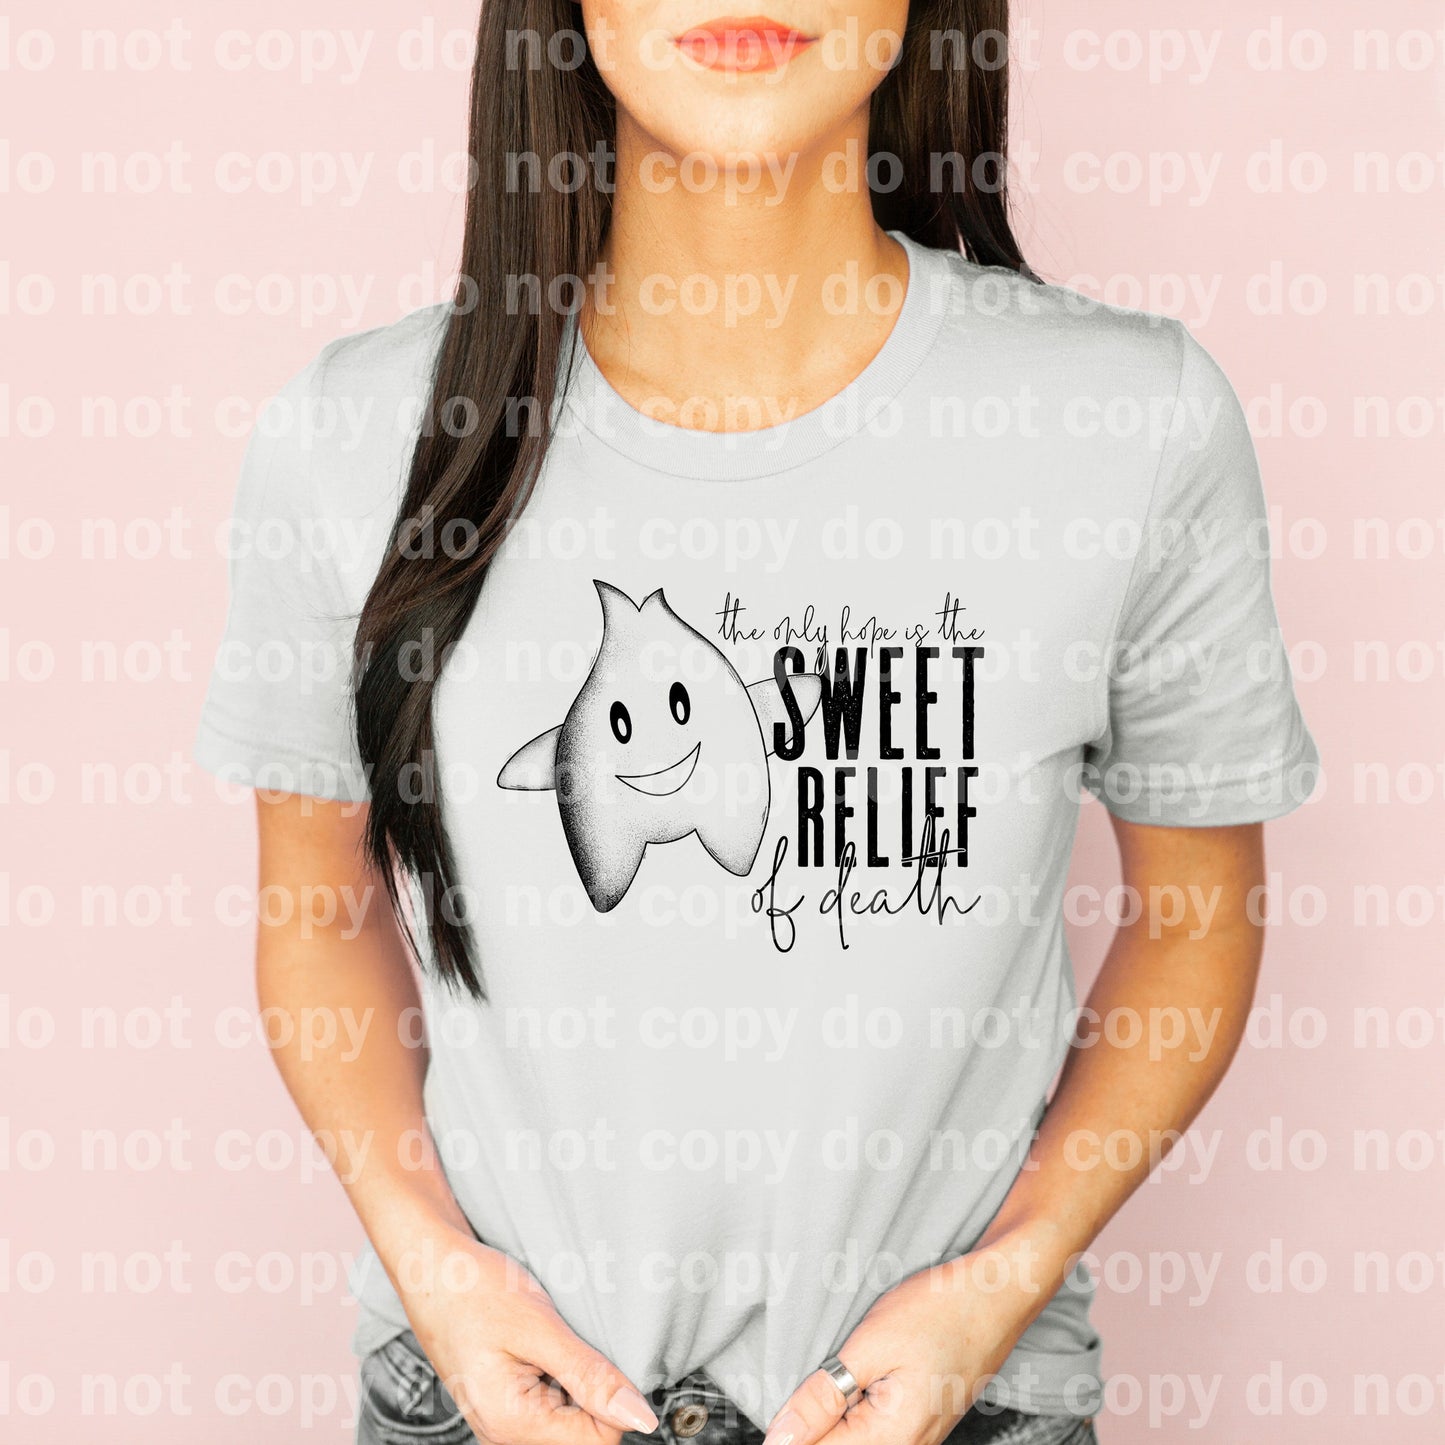 The Only Hope Is The Sweet Relief Of Death Full Color/One Color Dream Print or Sublimation Print